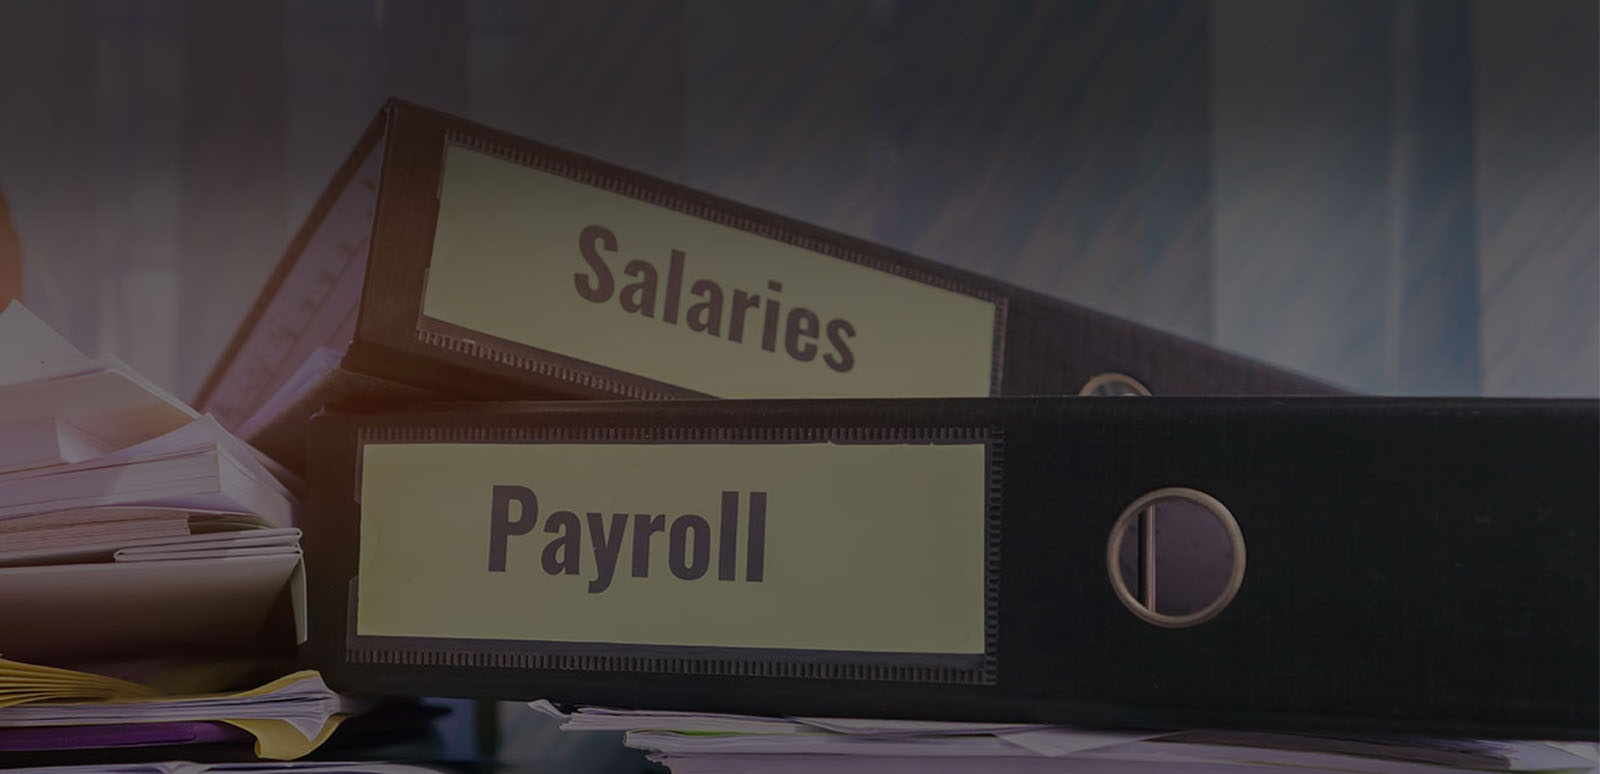 Find the best Payroll services for you and your business